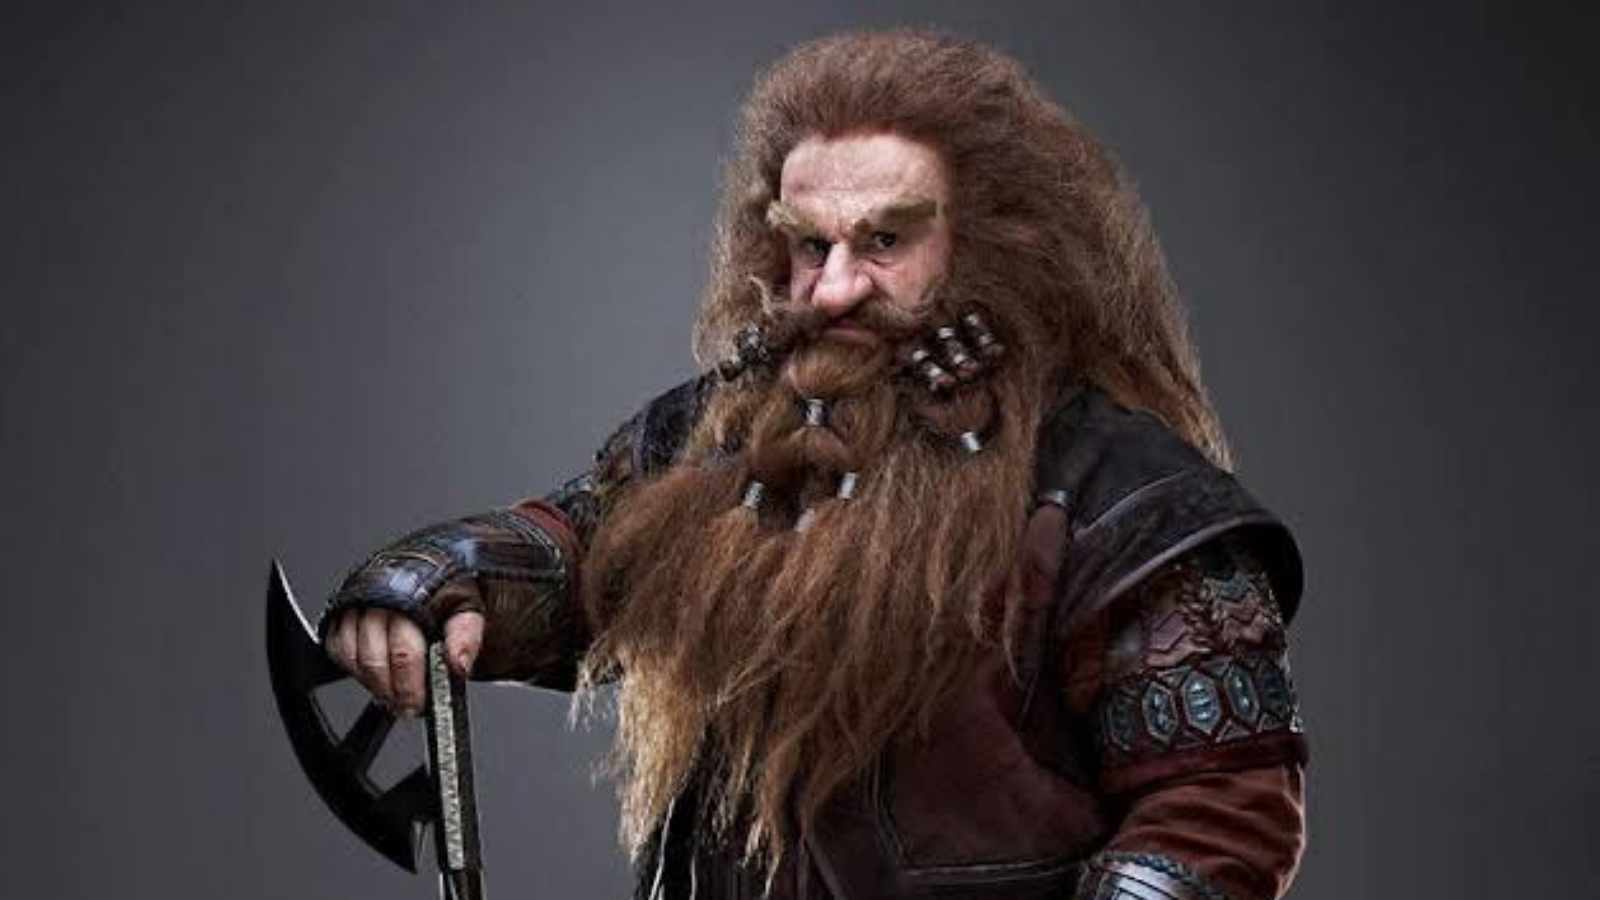 Most powerful dwarves in The Rings Of Power